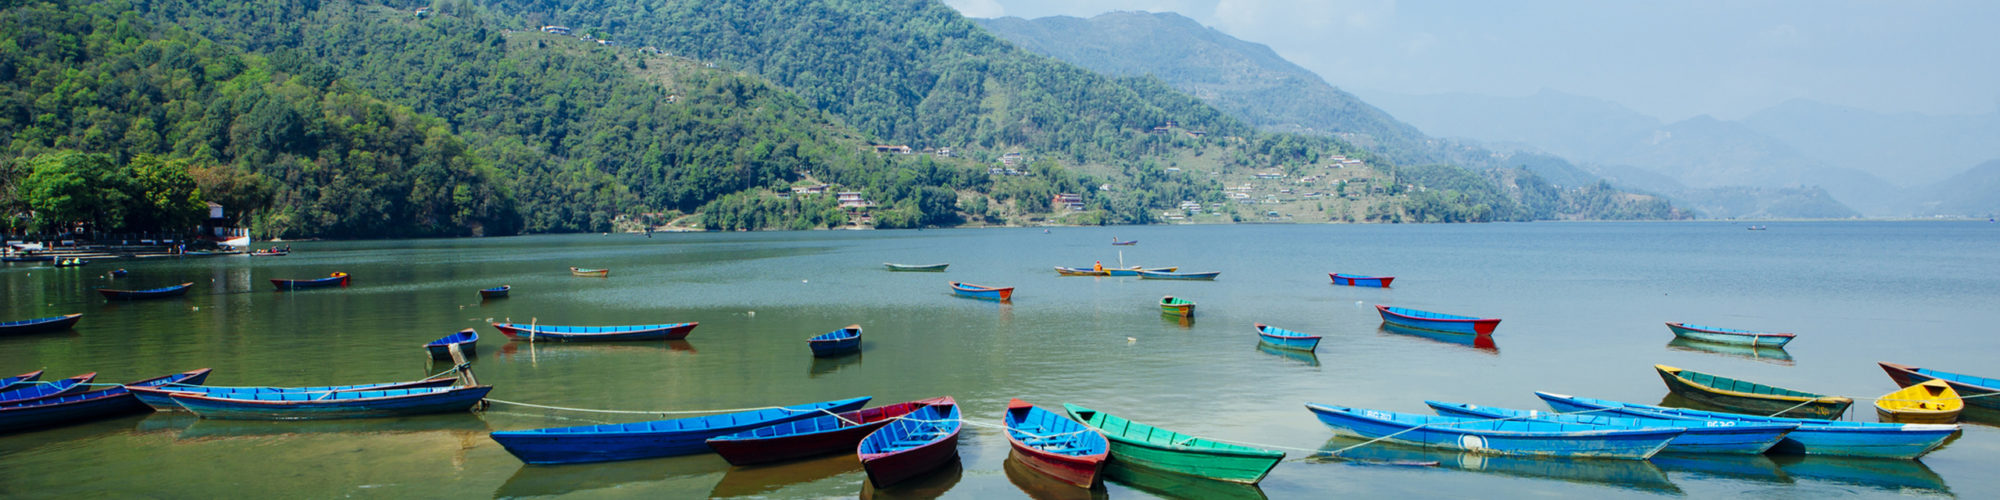 Pokhara travel agents packages deals